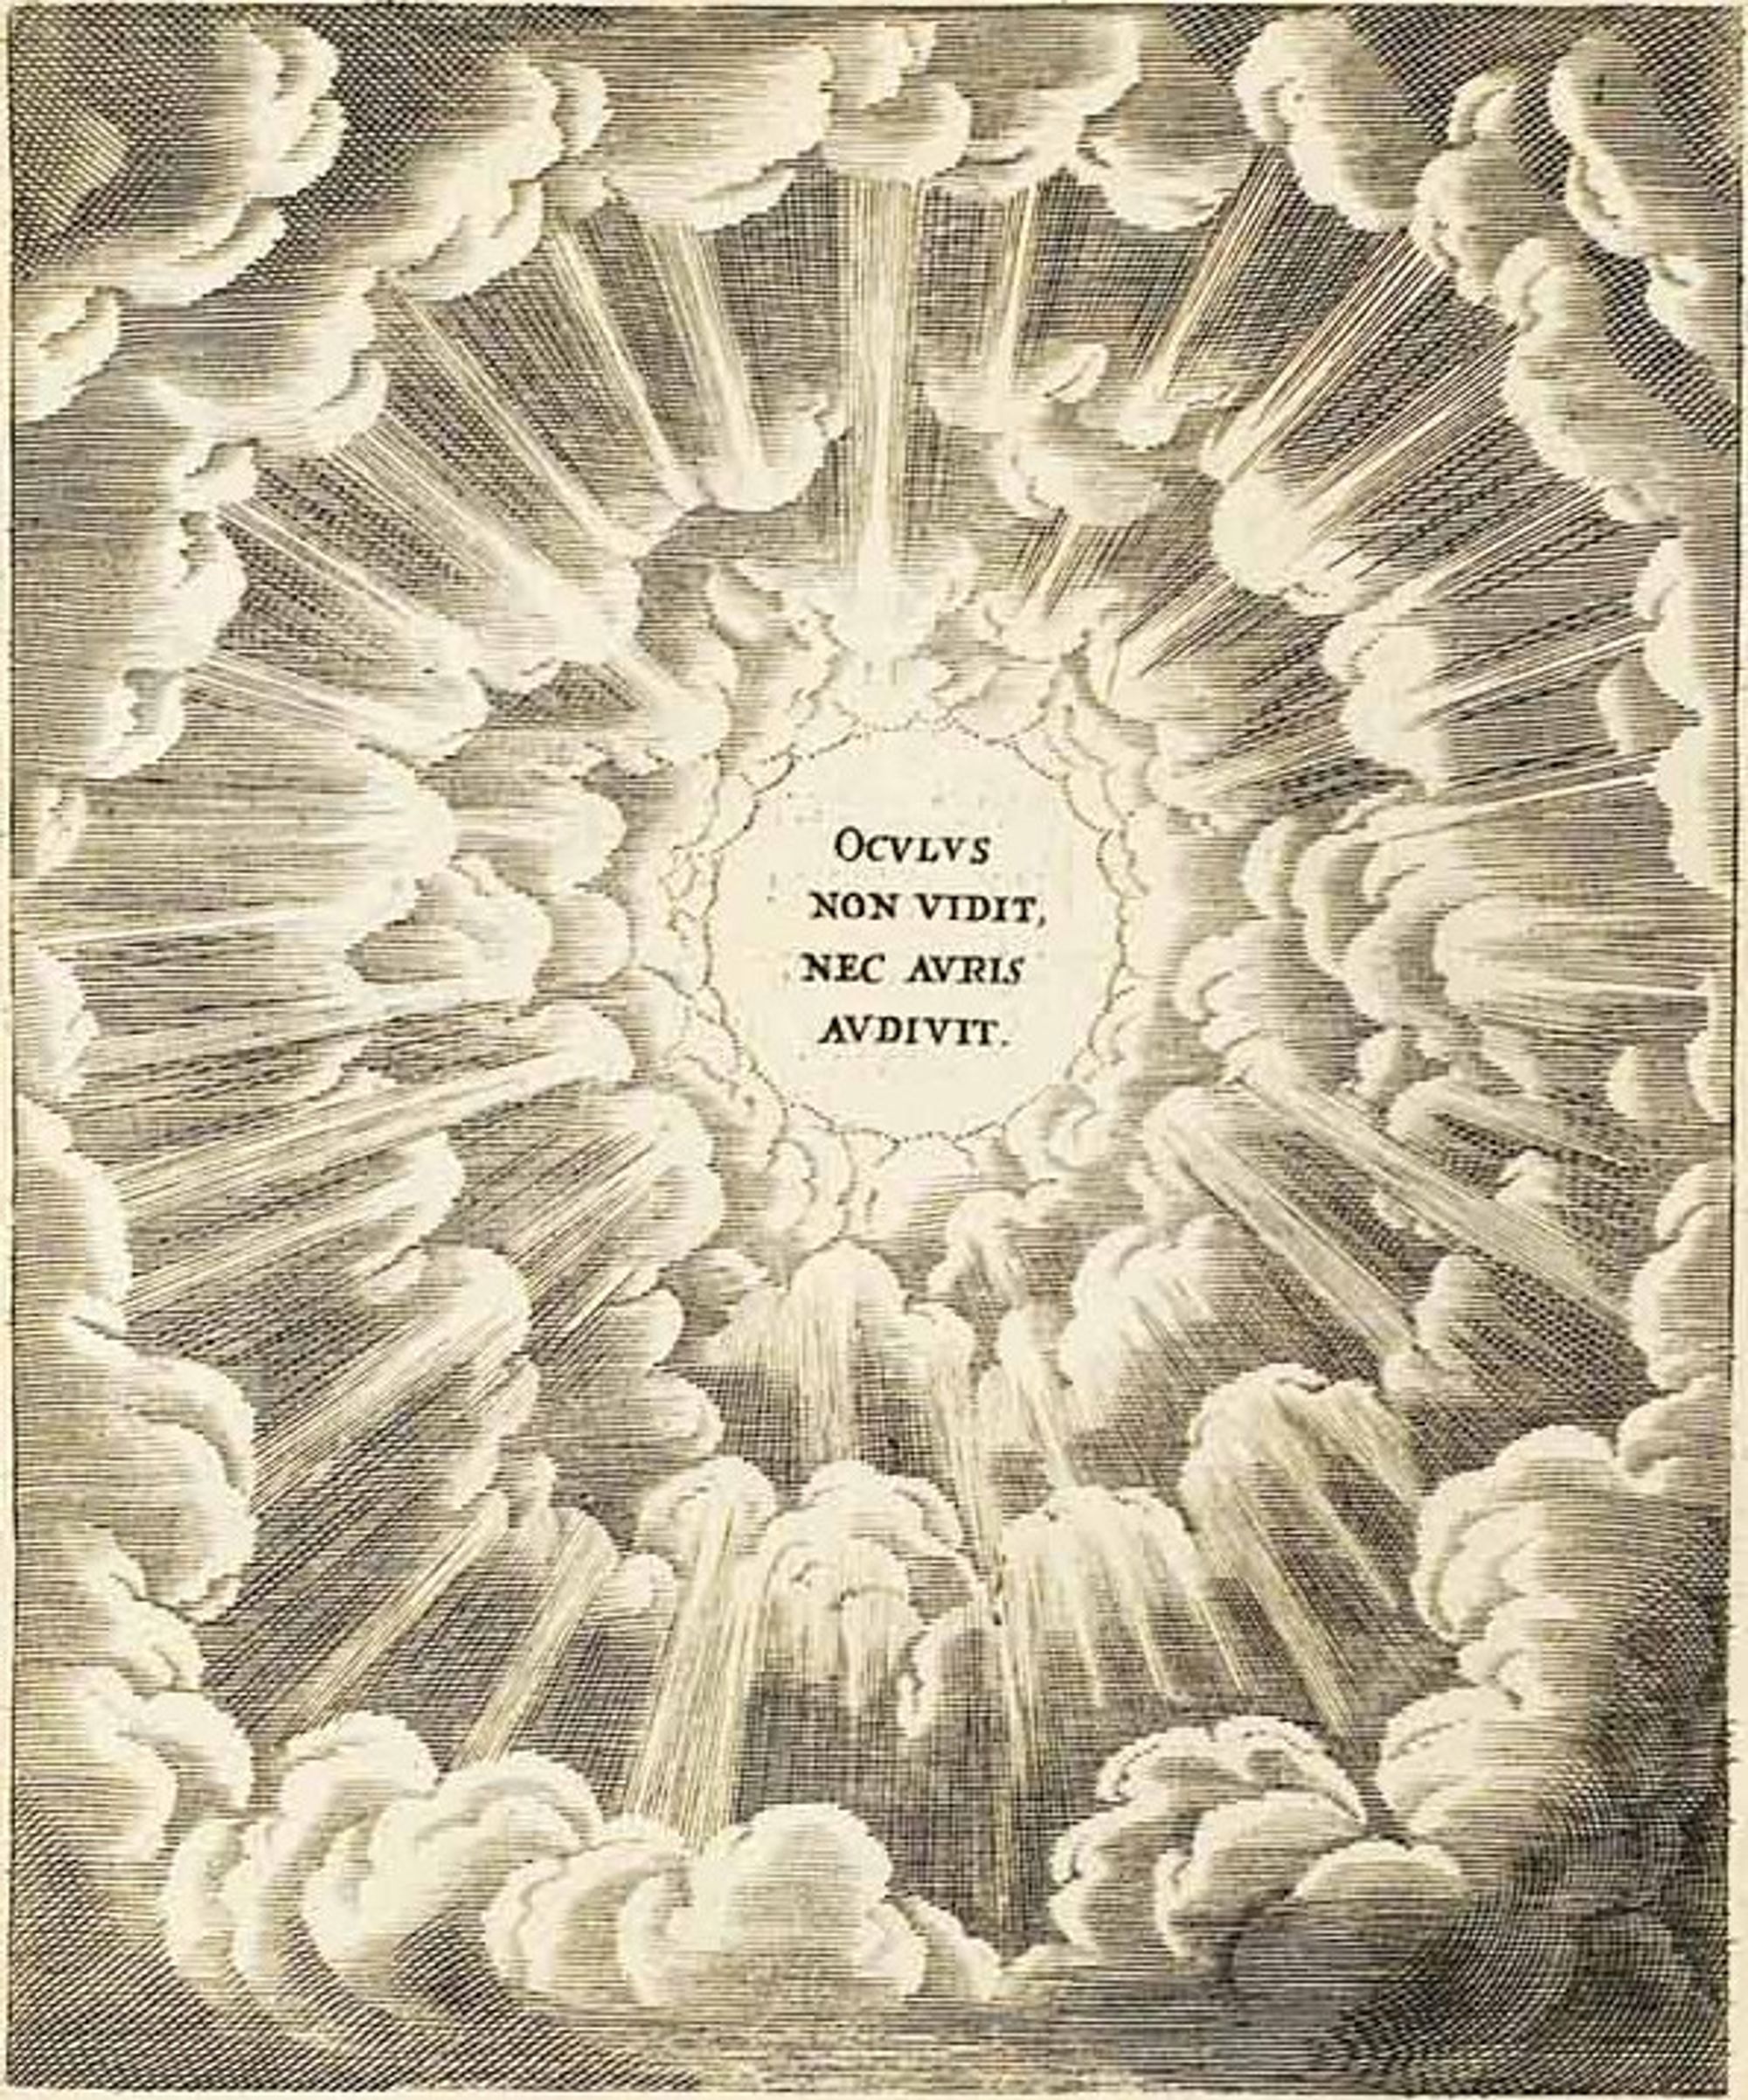 A series of clouds surround a circle, which seems like the entryway to enlightenment. In the centre appears text in Latin, “What no eye has seen, nor ear heard”, from 1 Corinthians 2:9.